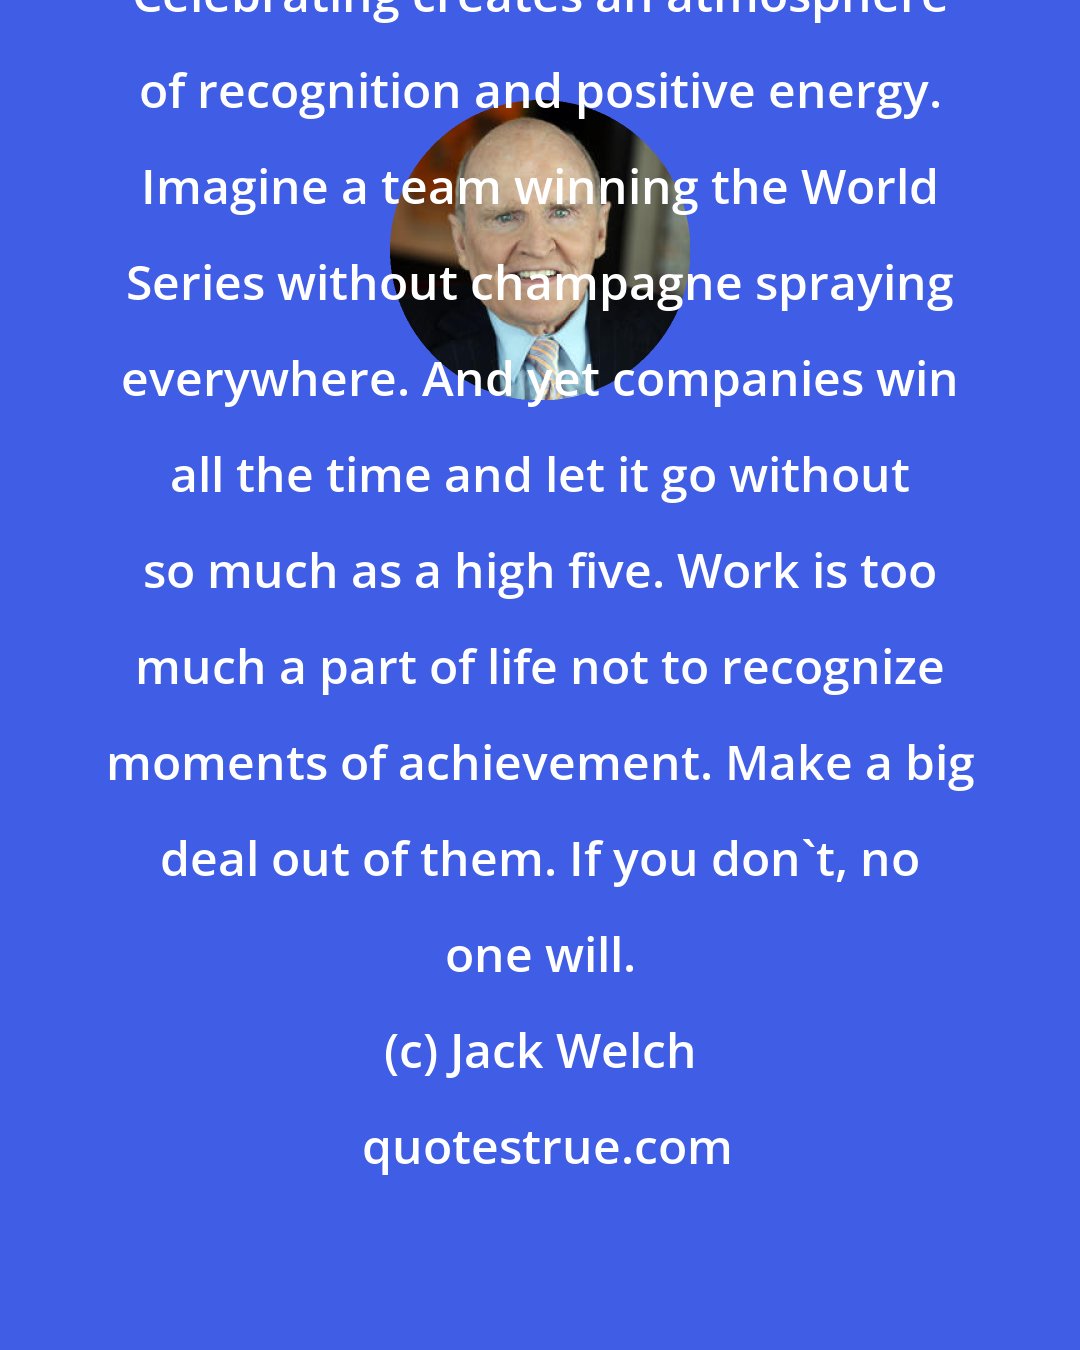 Jack Welch: Celebrating creates an atmosphere of recognition and positive energy. Imagine a team winning the World Series without champagne spraying everywhere. And yet companies win all the time and let it go without so much as a high five. Work is too much a part of life not to recognize moments of achievement. Make a big deal out of them. If you don't, no one will.